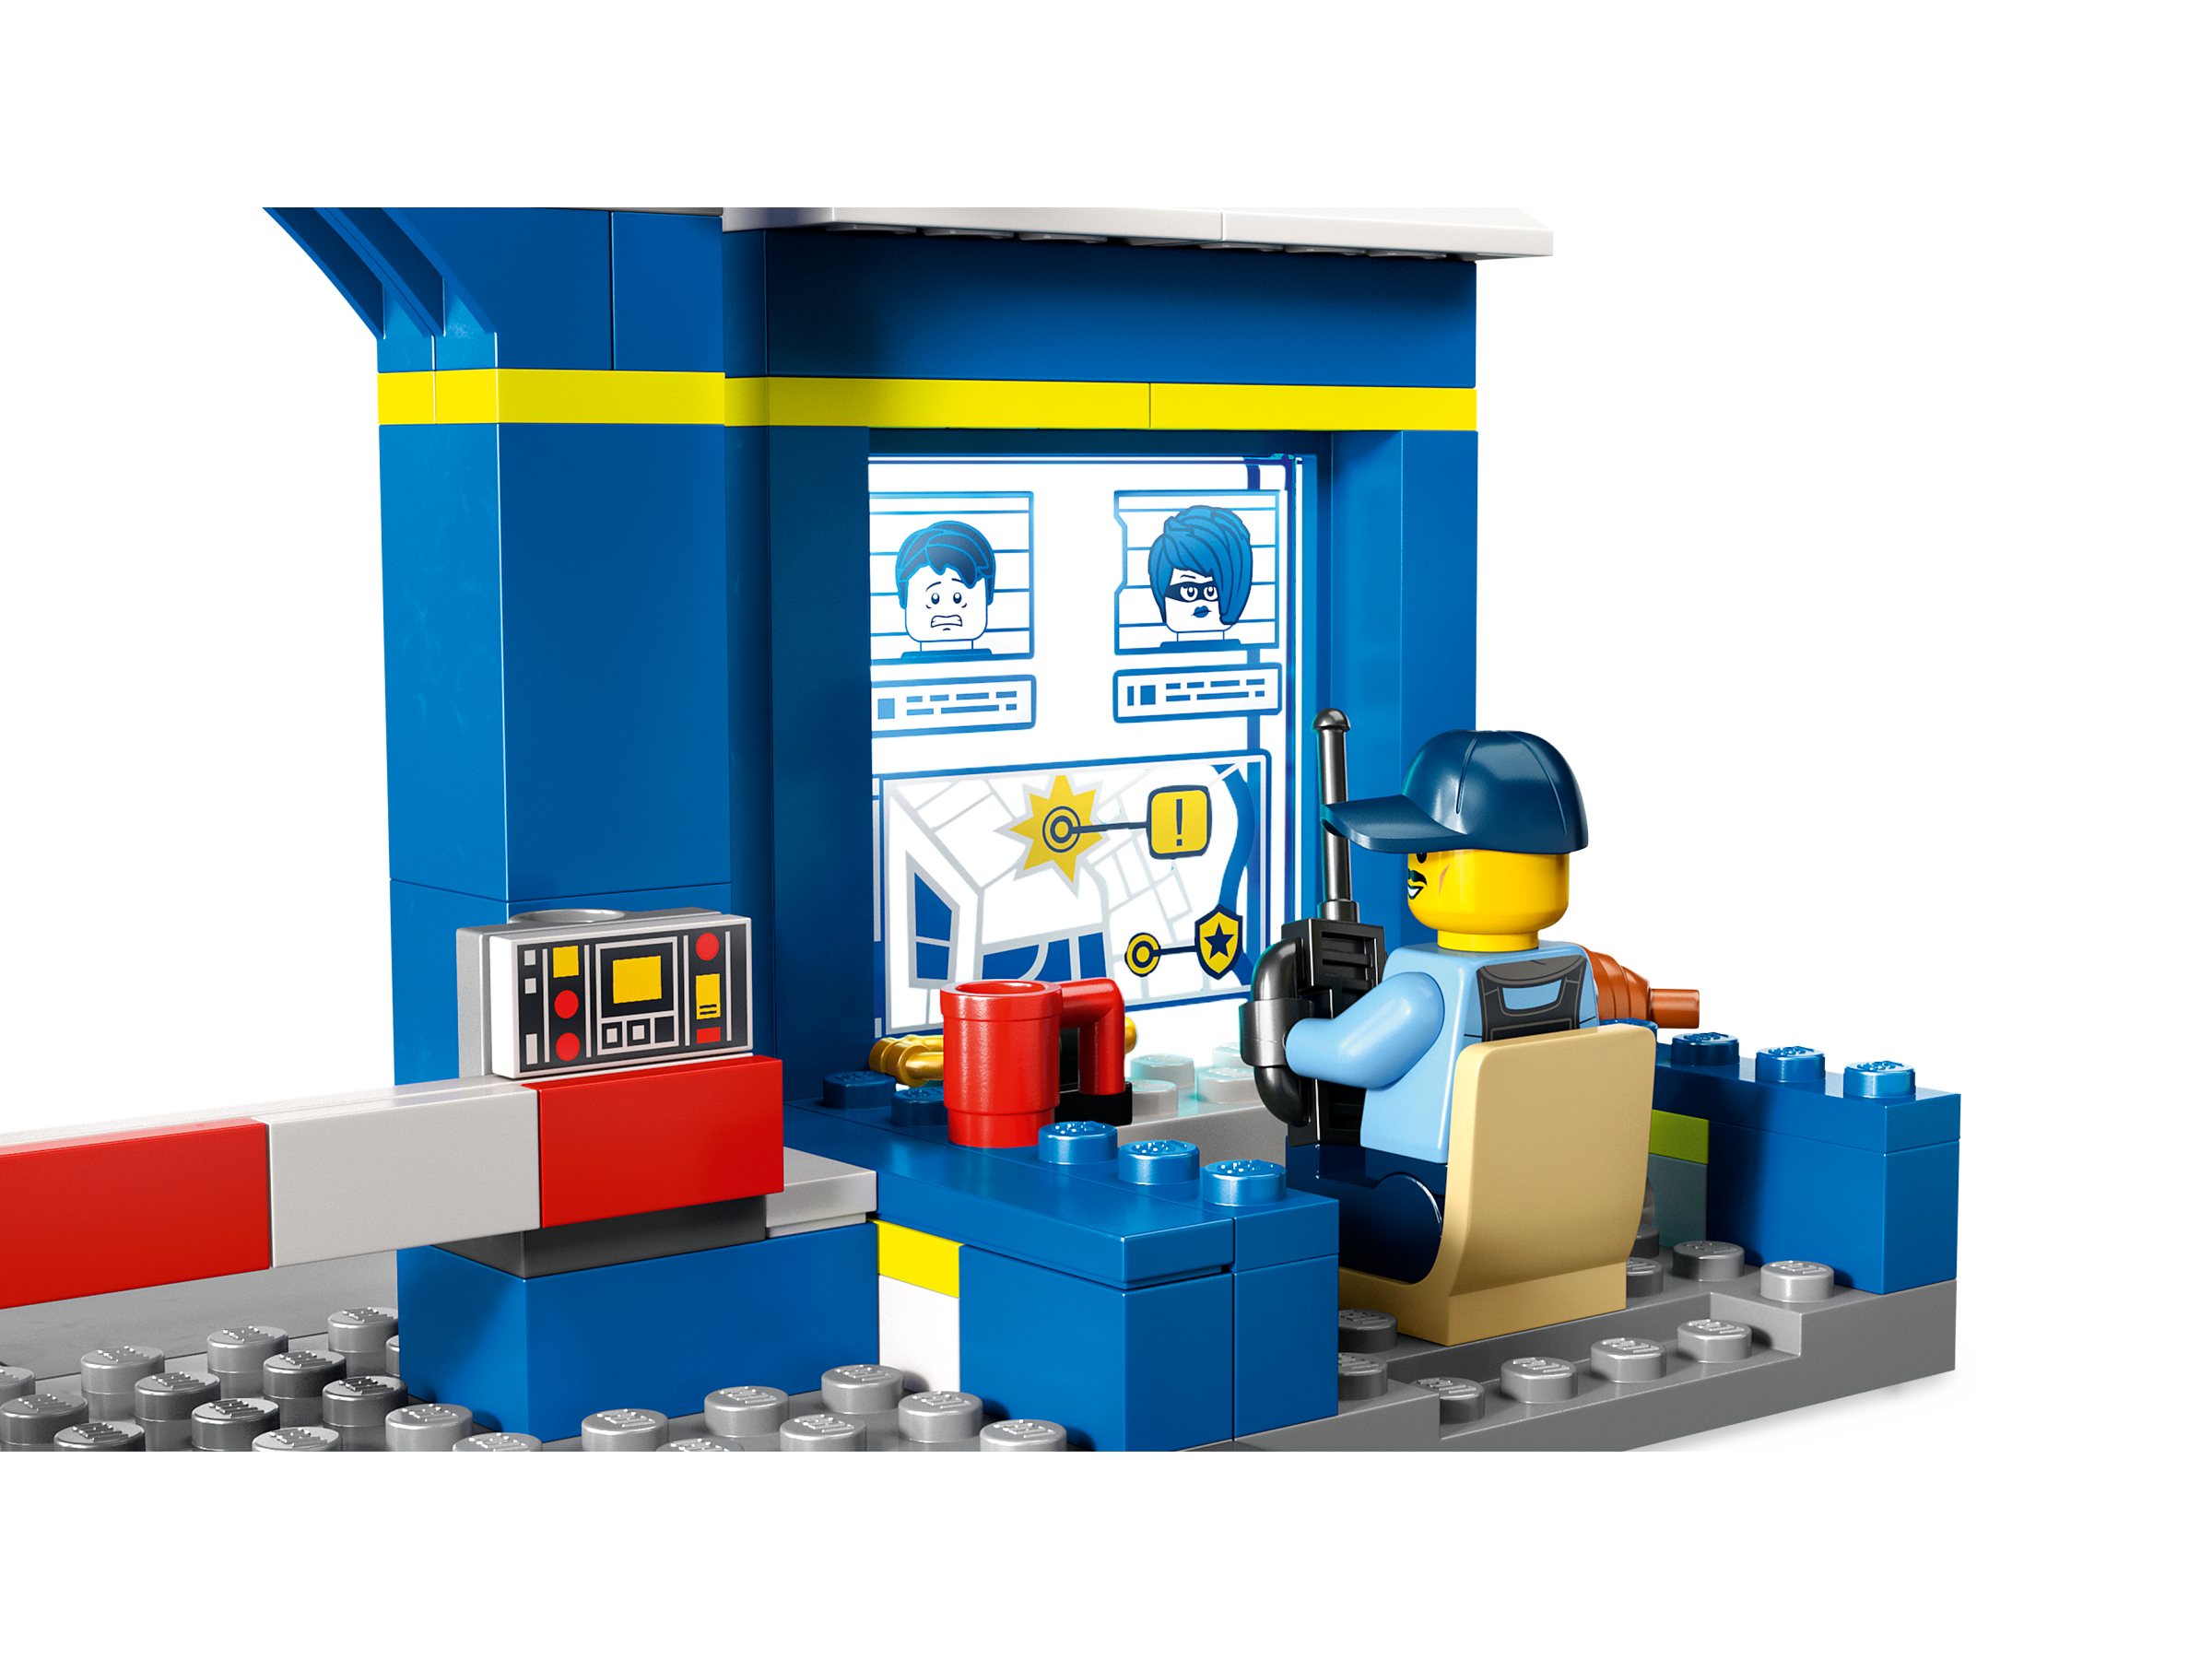 Police Brick Box 60270 | City | Buy online at the Official LEGO® Shop US